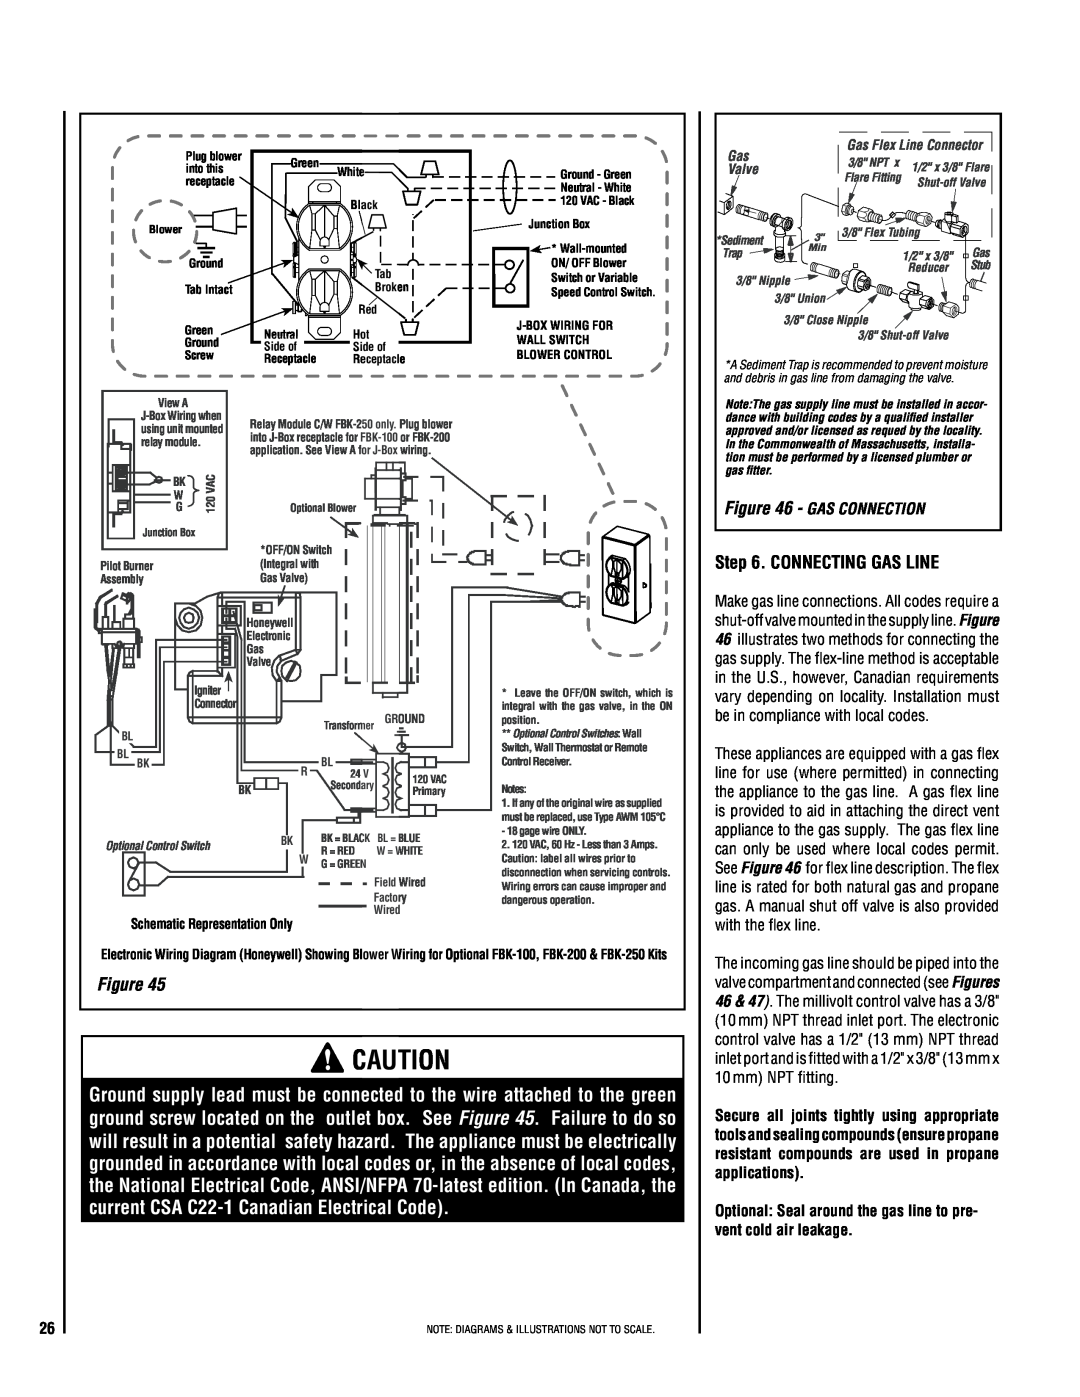 TOA Electronics SSDV-3328 installation instructions Connecting Gas Line, Gas Connection, Valve 